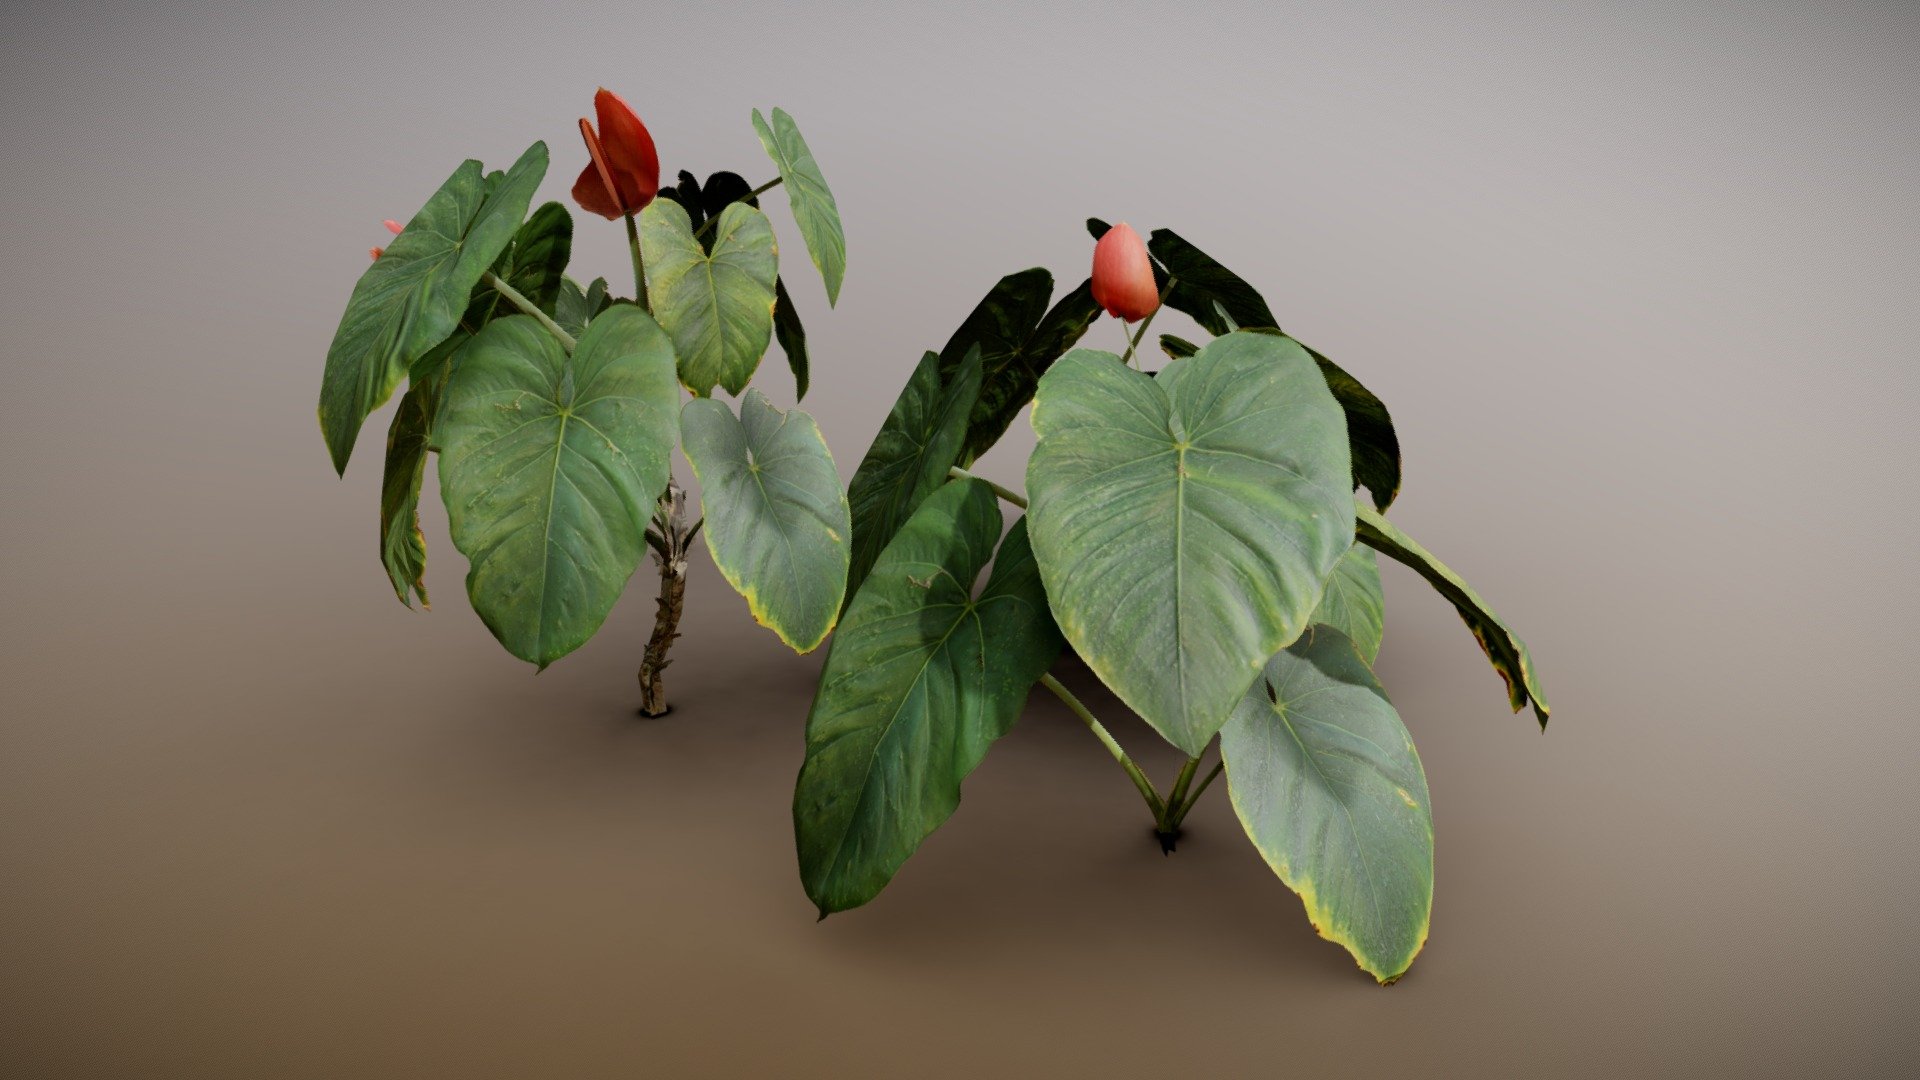 Details

Low poly Asset

4 Variations

Game Ready

Textures are 4K resolution

LODs included

Maps Sample: https://imgur.com/7mlFNgR

New Sample Project: https://www.artstation.com/artwork/3omgWg

Note: Wet leaves are just for presentation - Anthurium Plant - Buy Royalty Free 3D model by Paul (@nathan.d1563) 3d model